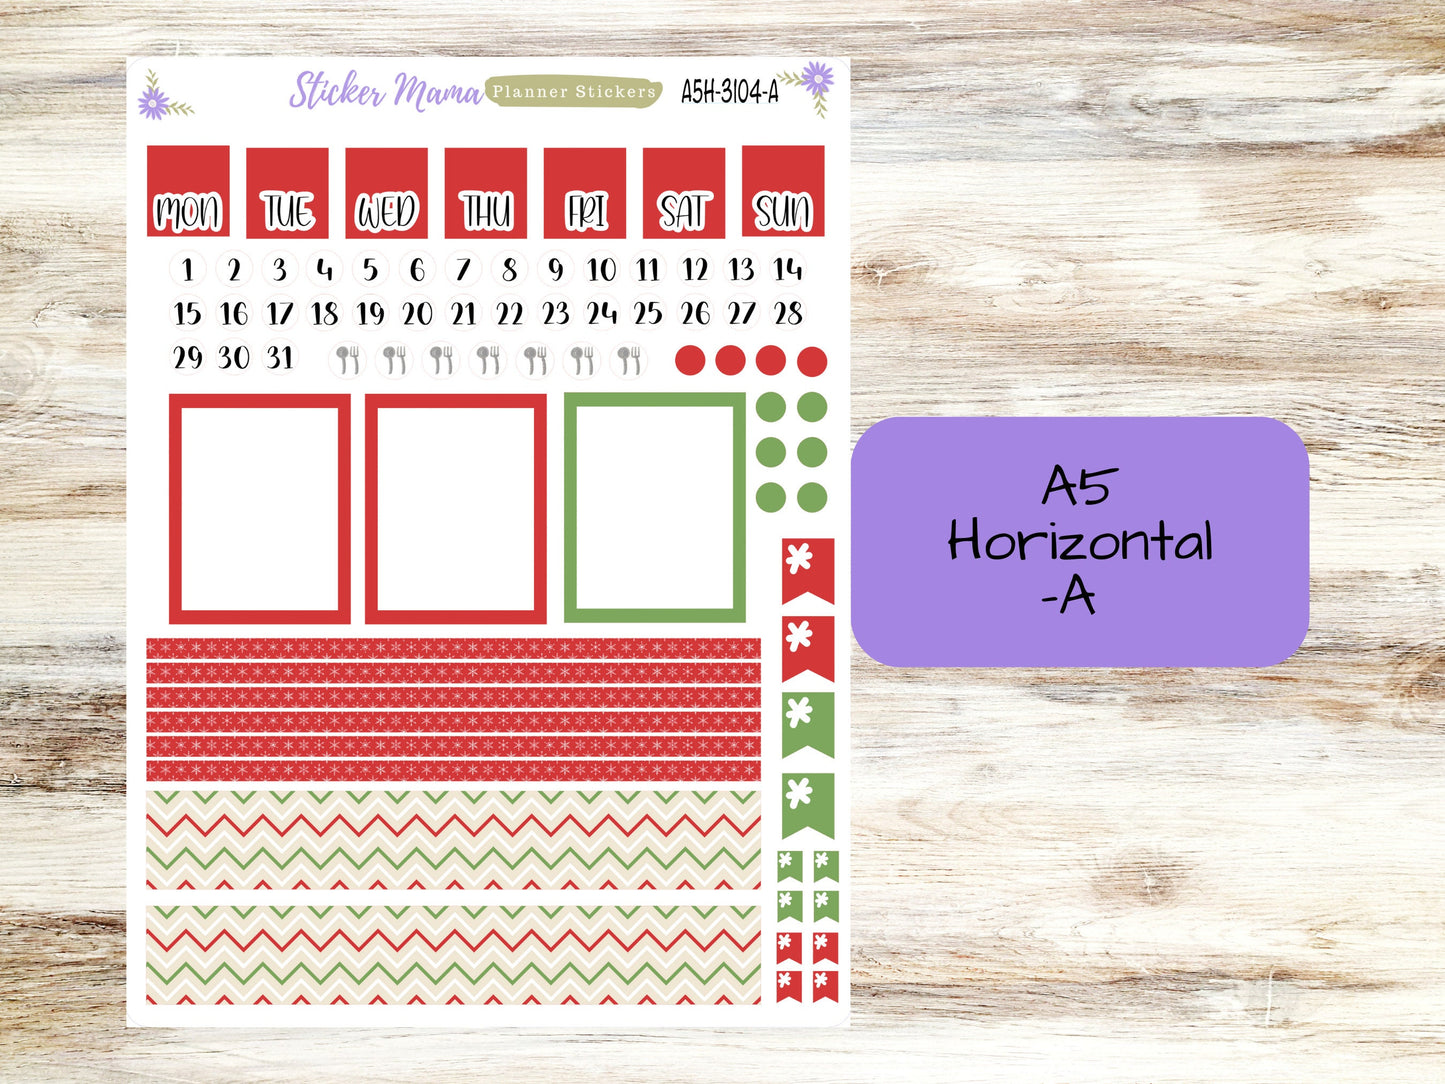 A5 Horizontal || #3104 Santa's Here || A5 Weekly Kit || Planner Stickers || Erin Condren A5 Horizontal Weekly Kit